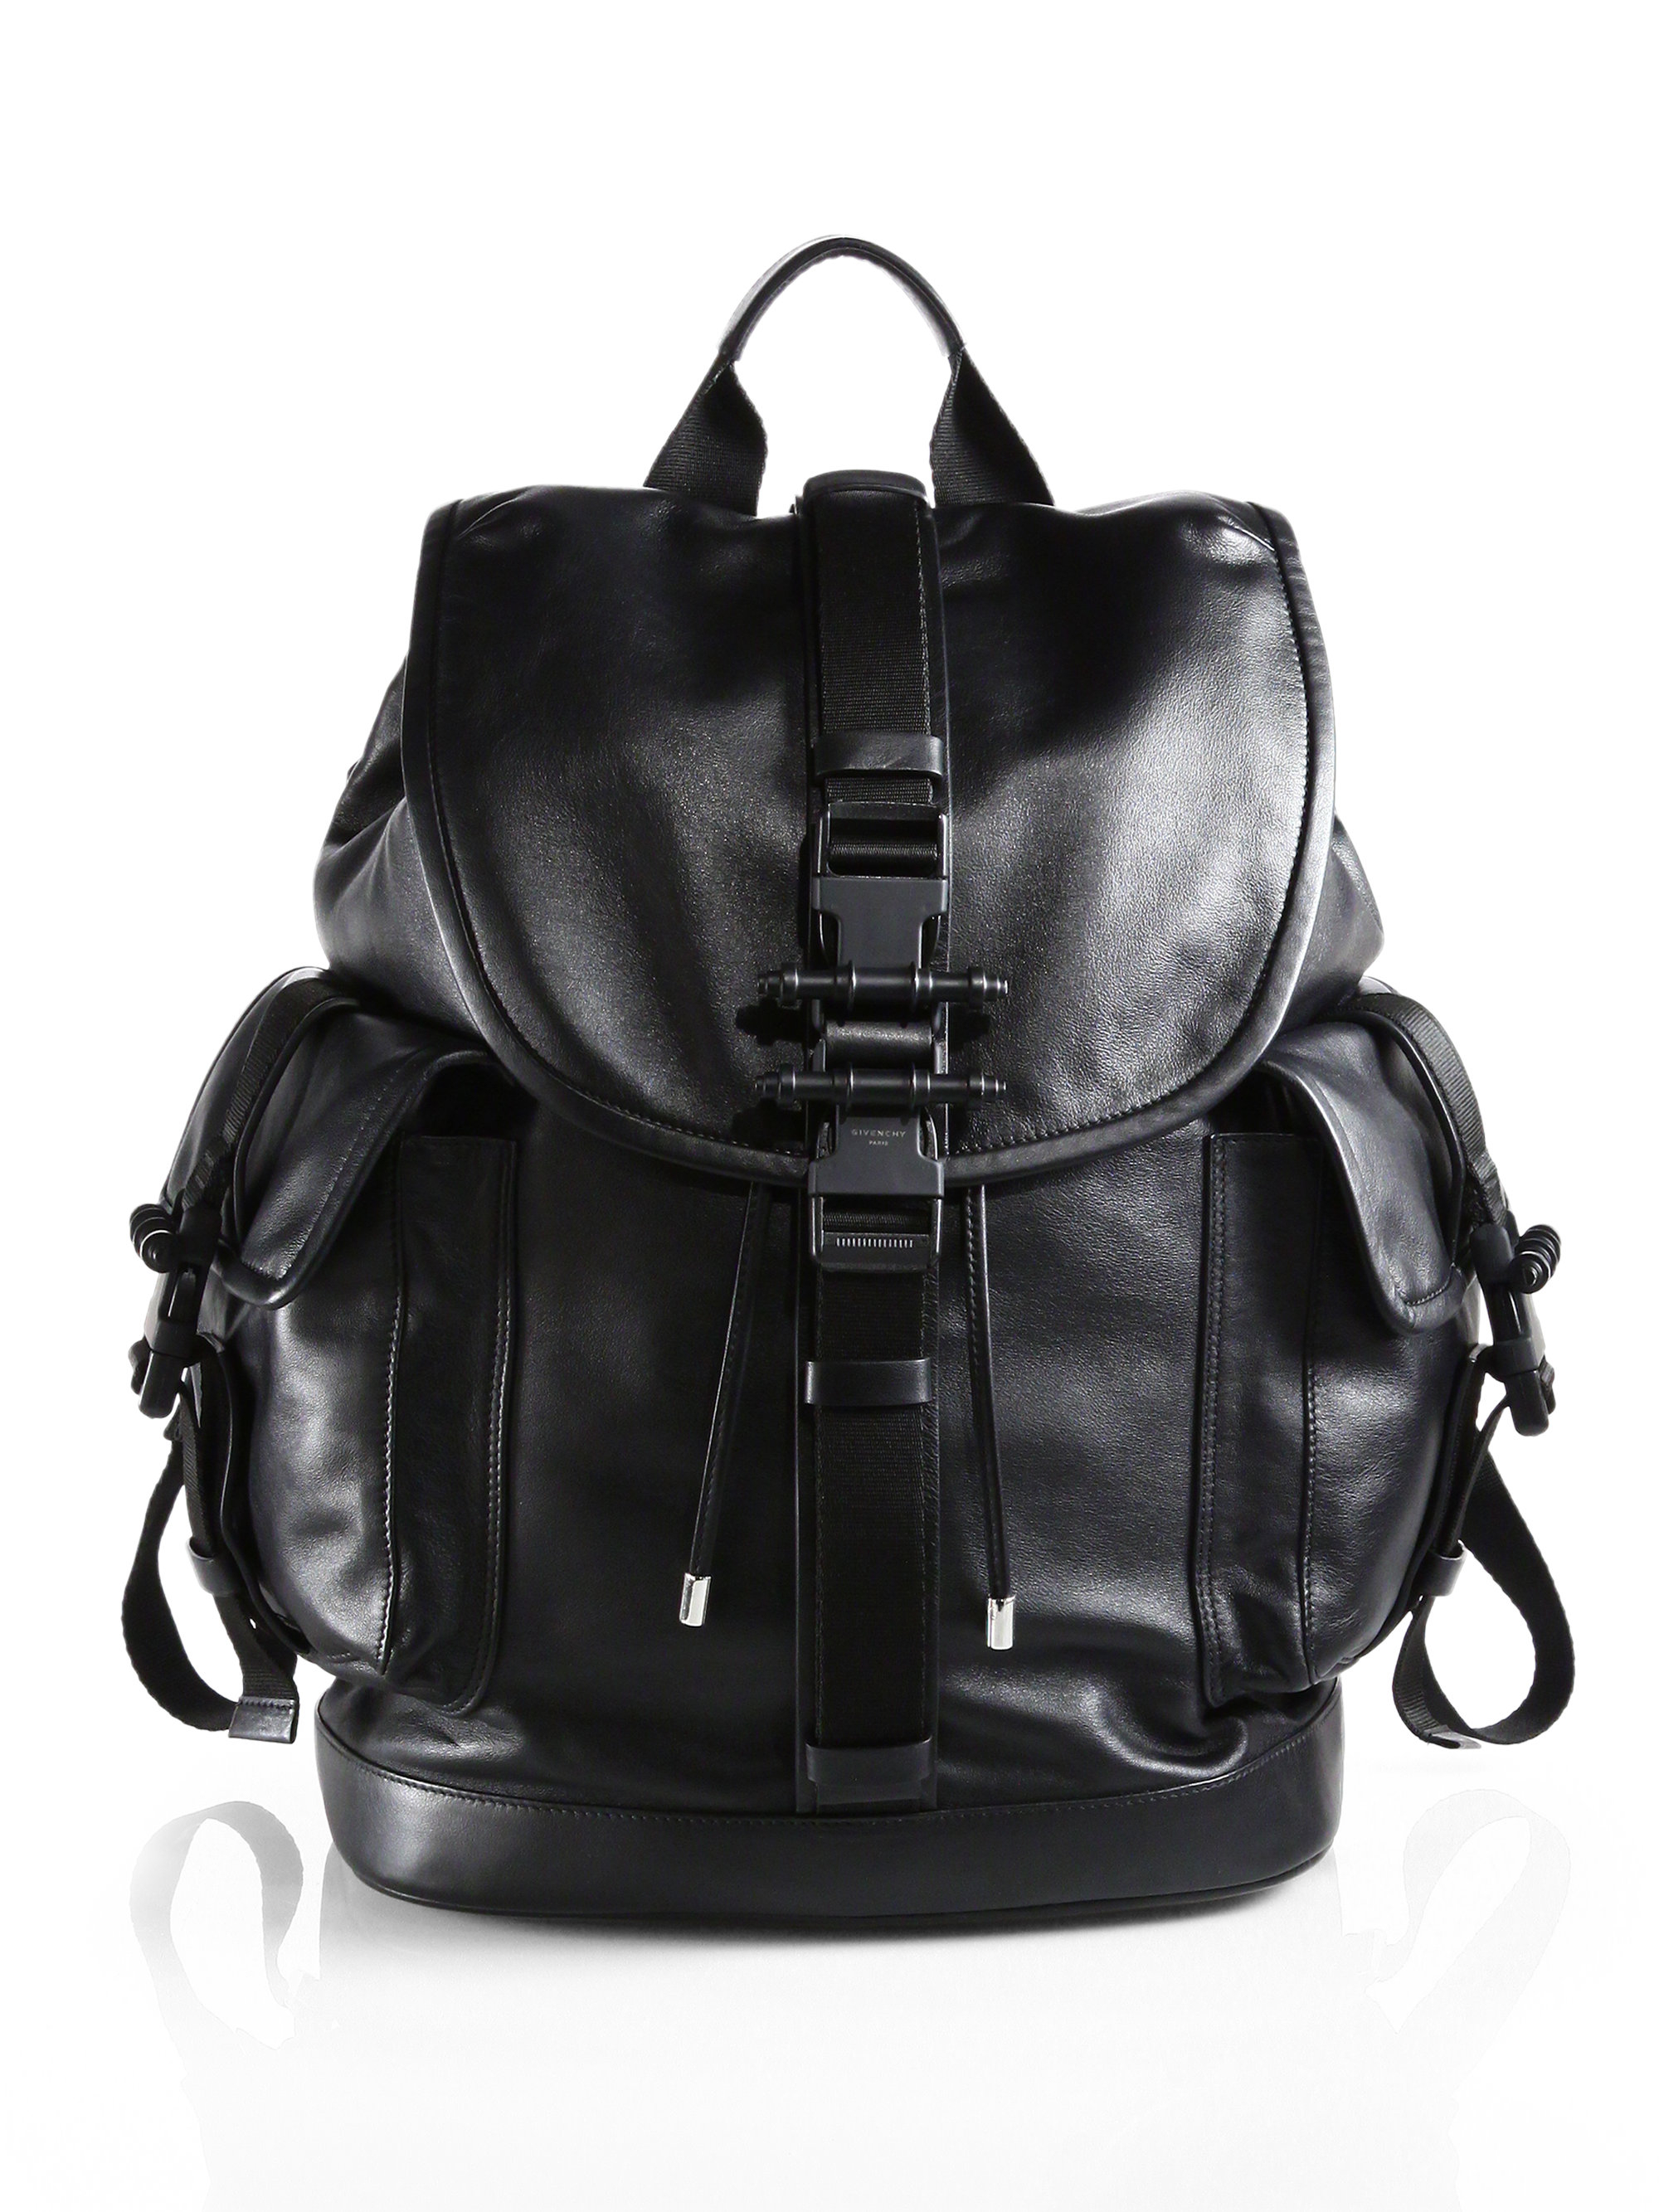 Lyst - Givenchy Obsedia Leather Backpack in Black for Men